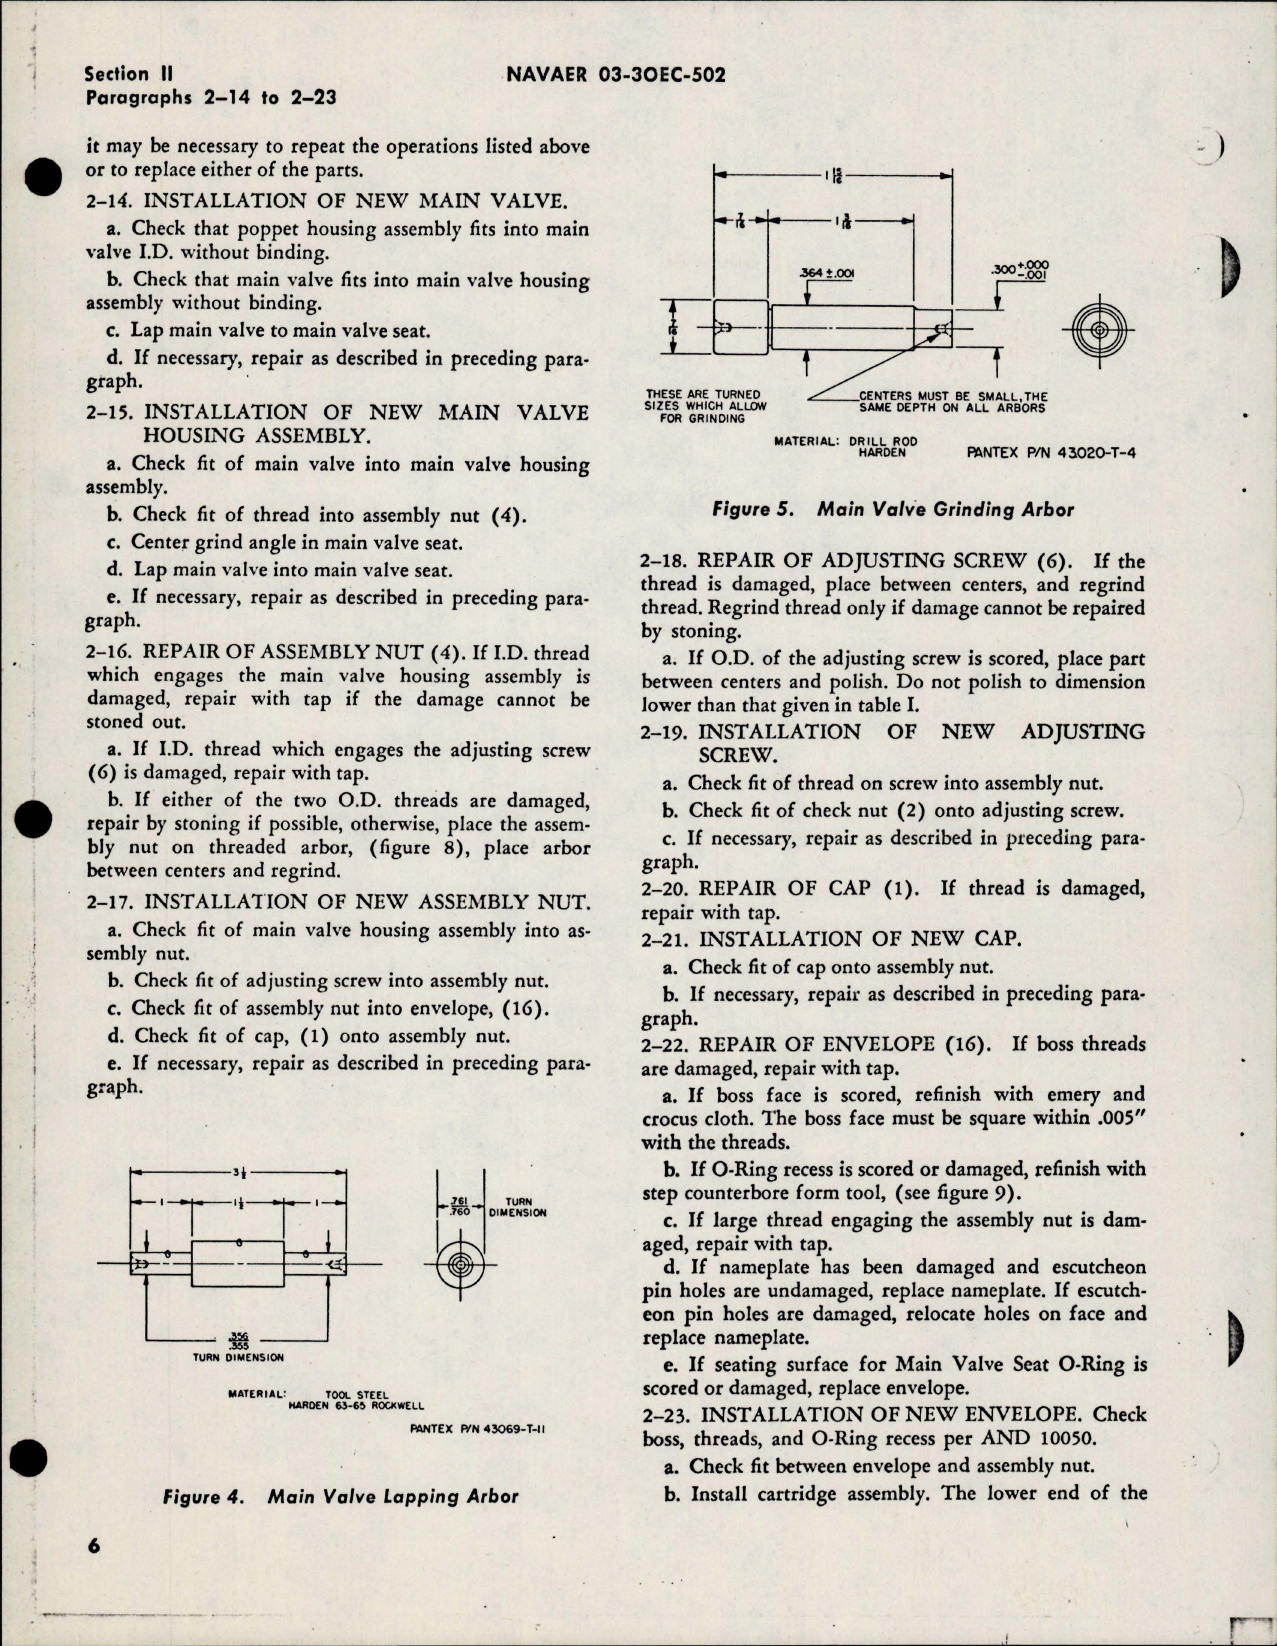 Sample page 9 from AirCorps Library document: Overhaul Instructions for Hydraulic Pressure Relief Valve